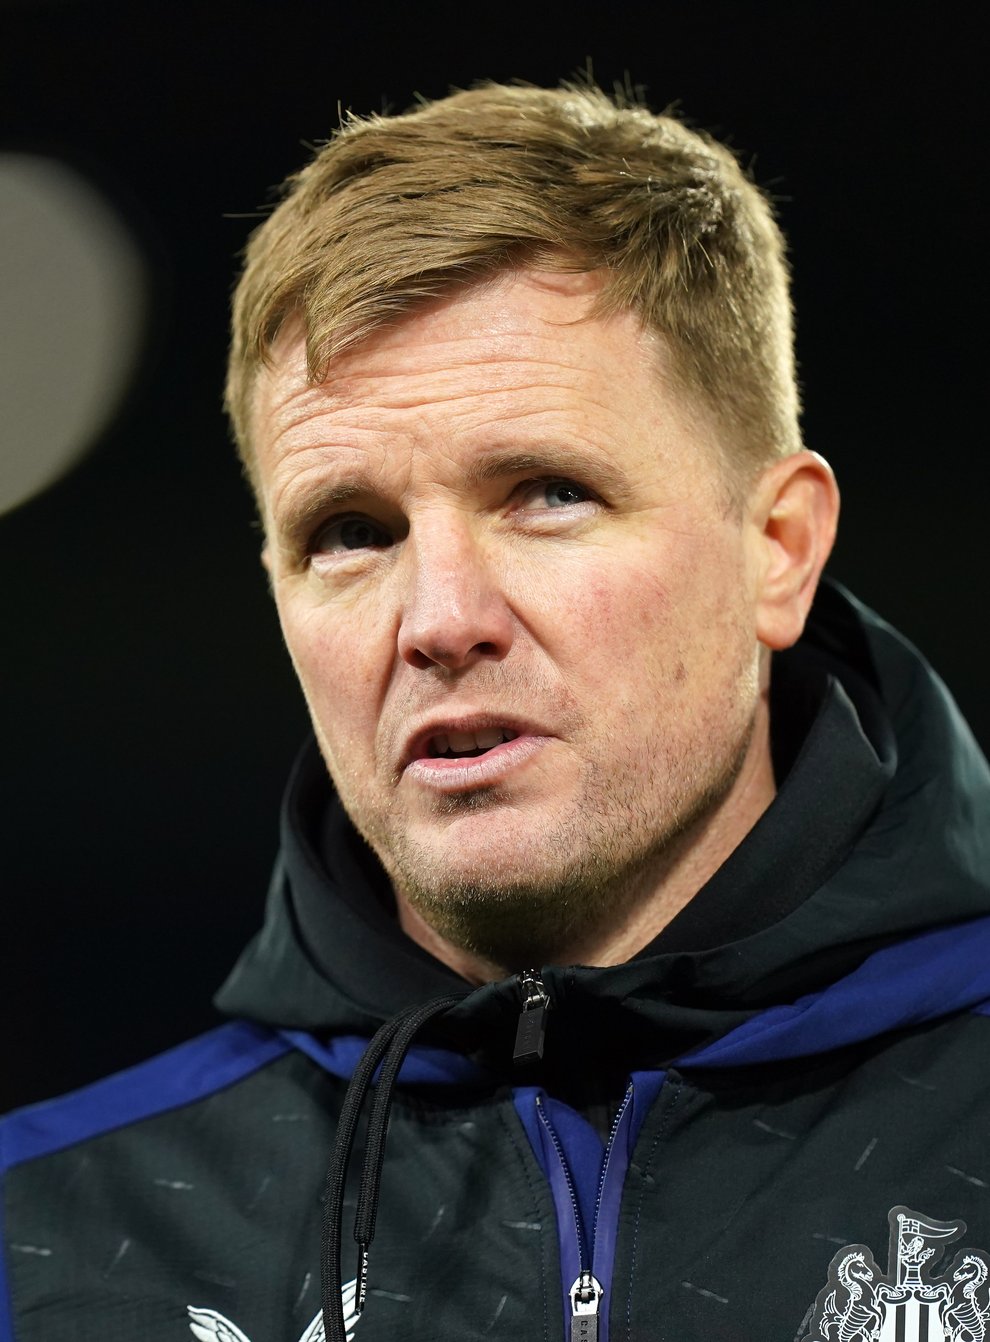 Newcastle head coach Eddie Howe has warned the club will be affected by spending restrictions for years (Mike Egerton/PA)